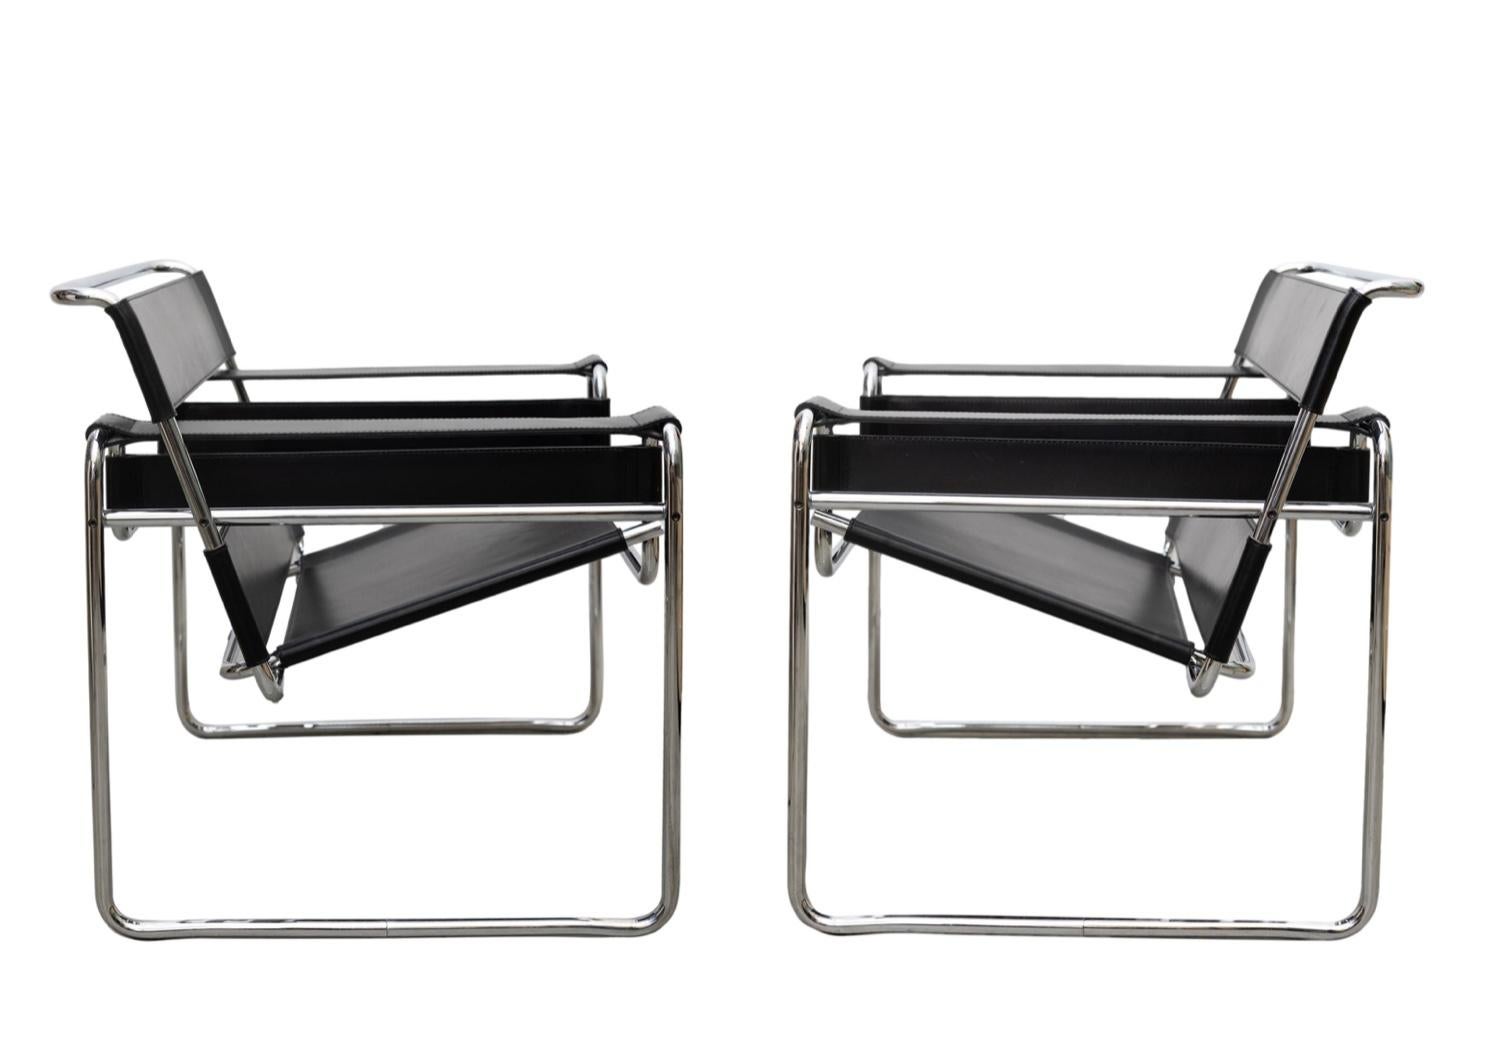 Pair of the iconic Mid-Century Modern Wassily chairs with chrome frames and black leather. In great vintage condition with some beautiful light wear to the leather.